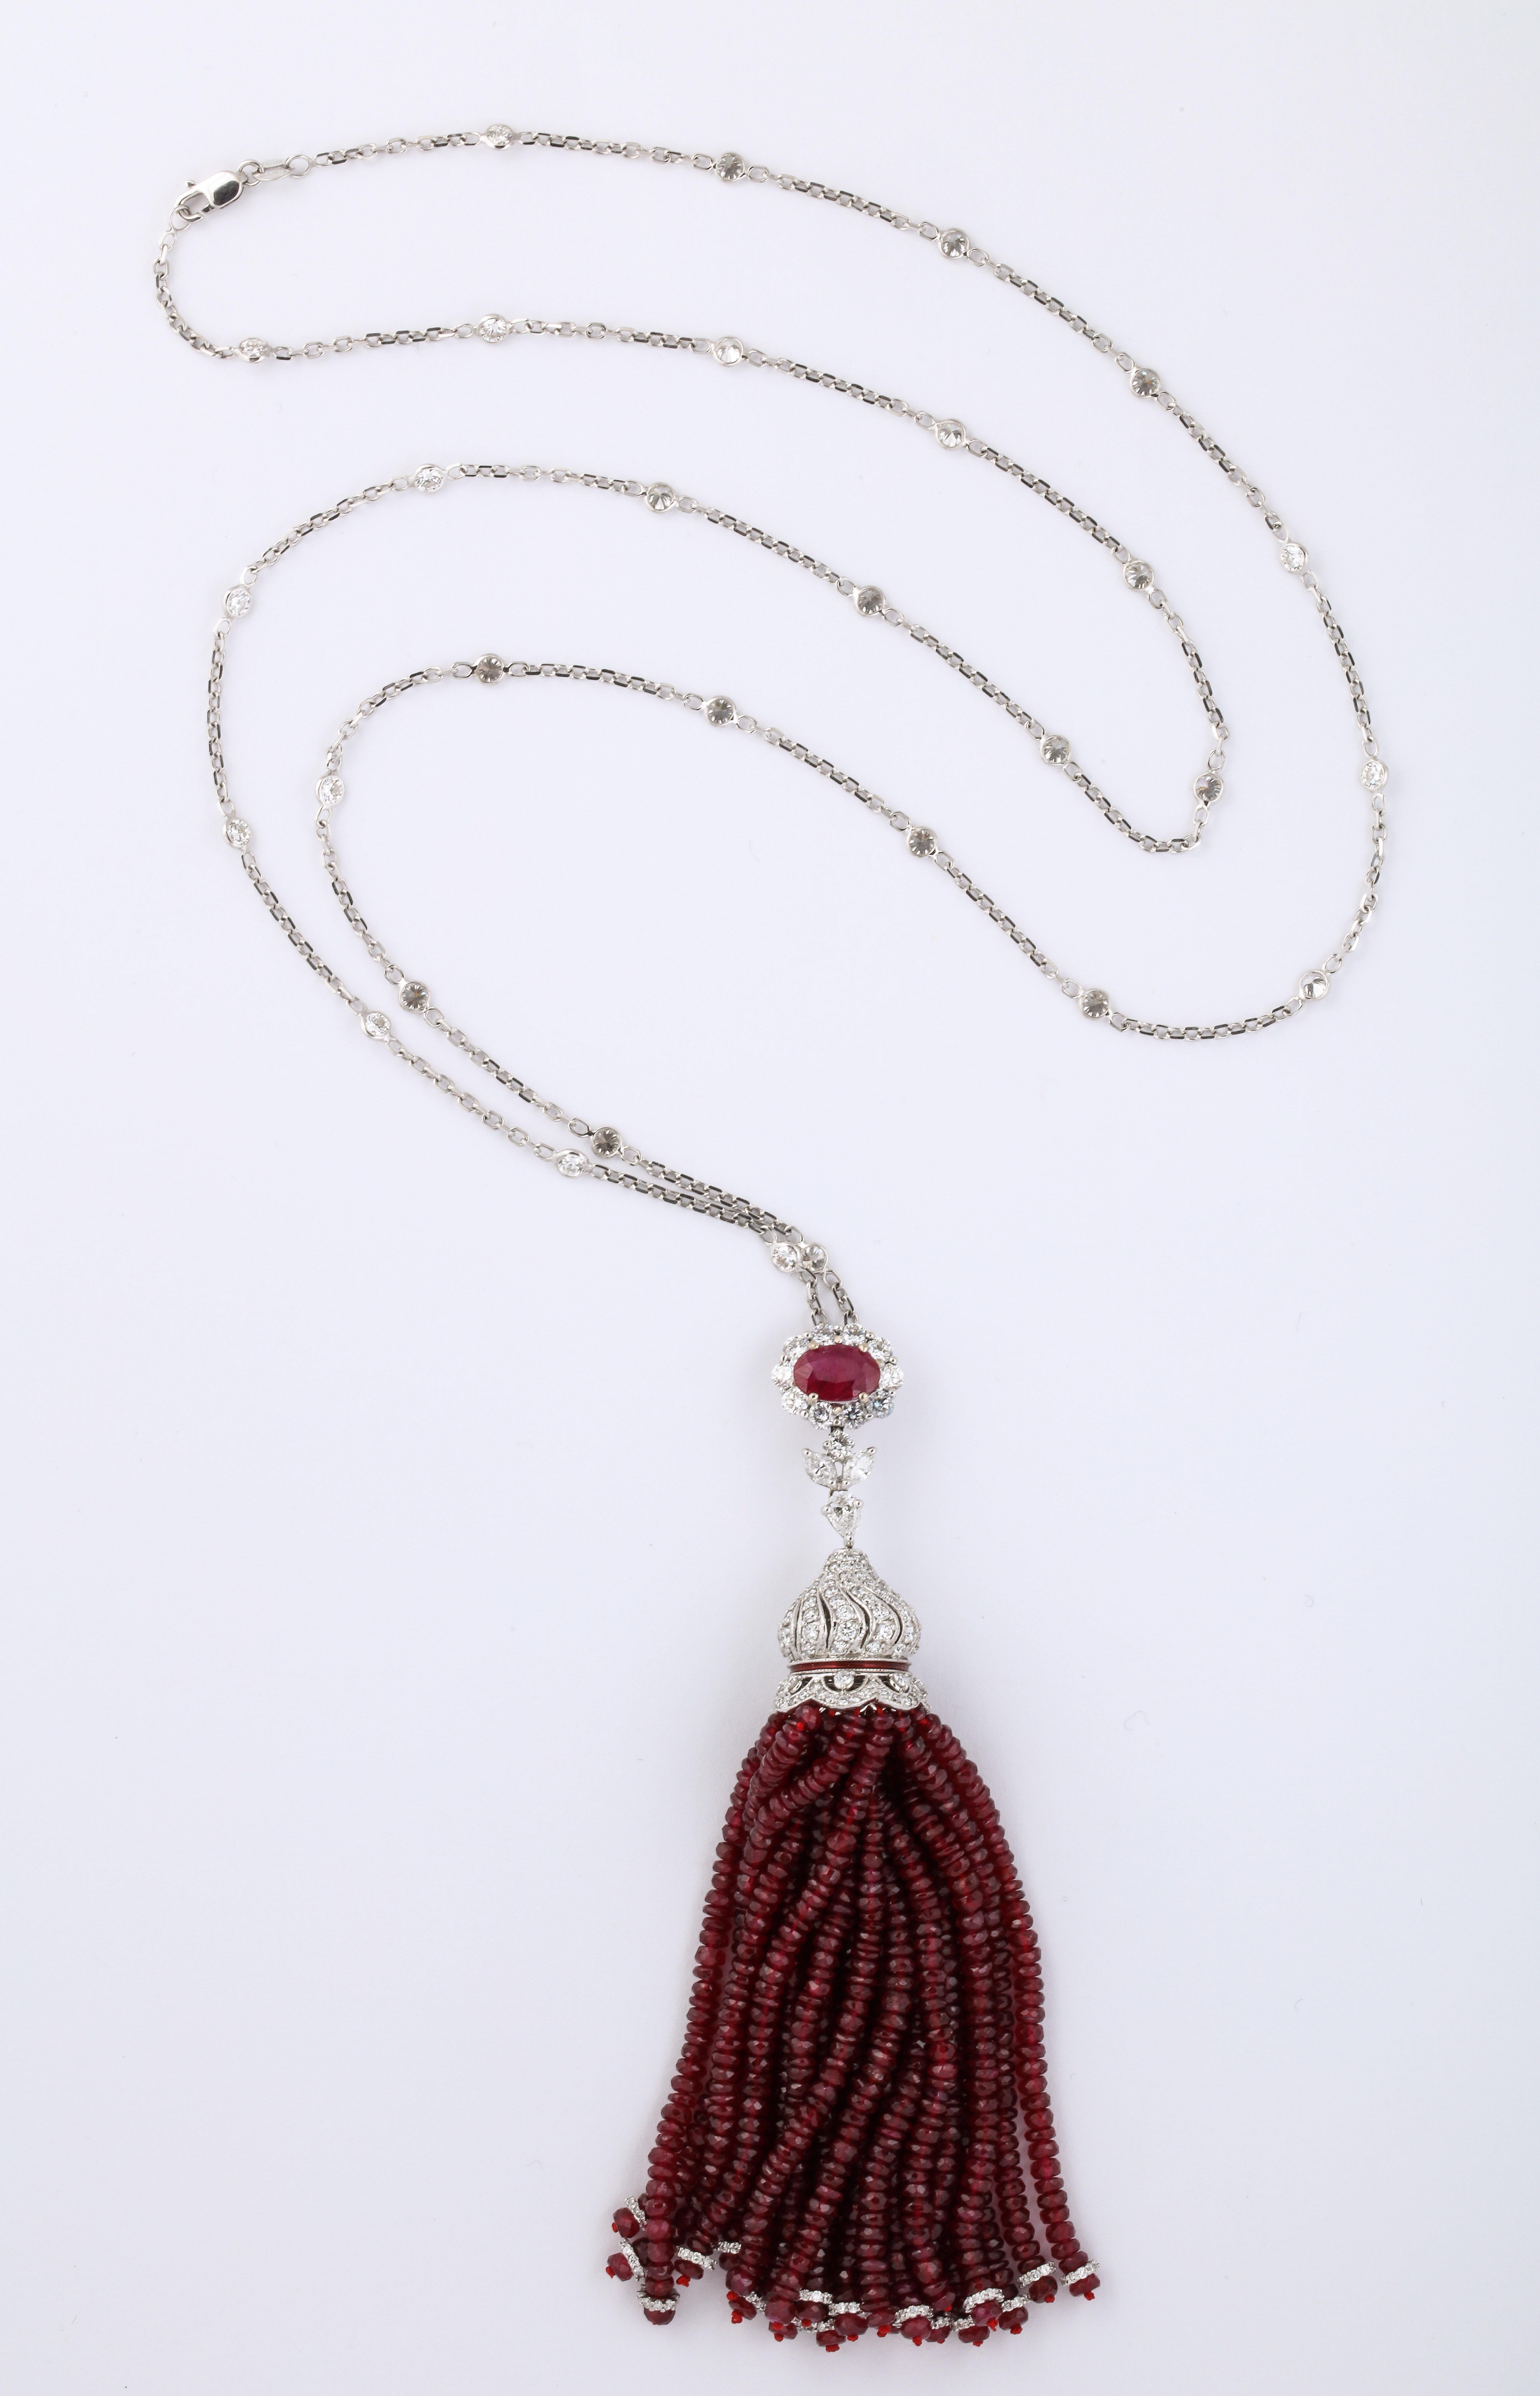 
An important Ruby and Diamond Tassel Necklace

175 carats of fine Ruby and 8.38 carats of white round brilliant diamonds. 

30 inch removable diamond by yard chain, set in white gold. The tassel measures 4 inches in length. 

A fabulous piece of